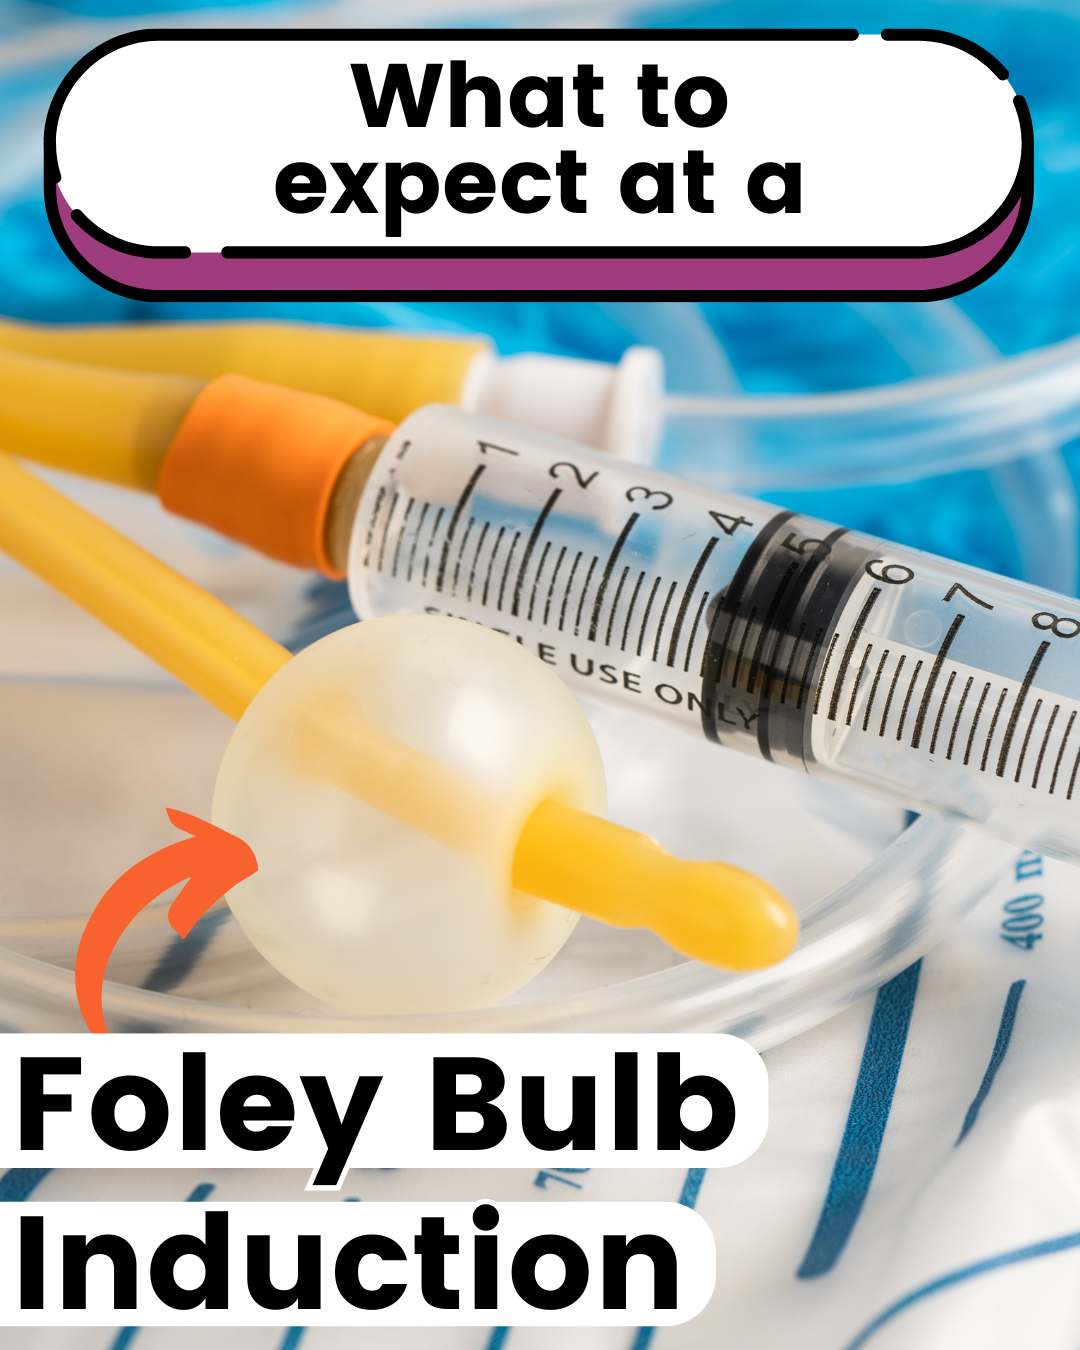 How painful is a Foley bulb induction? You'd be surprised that it varies GREATLY from person to person, and largely depends on your provider’s skill and your own body's response. Dive into this in-depth discussion of Foley Bulb induction’s pain factor - a hot topic that divides opinions!